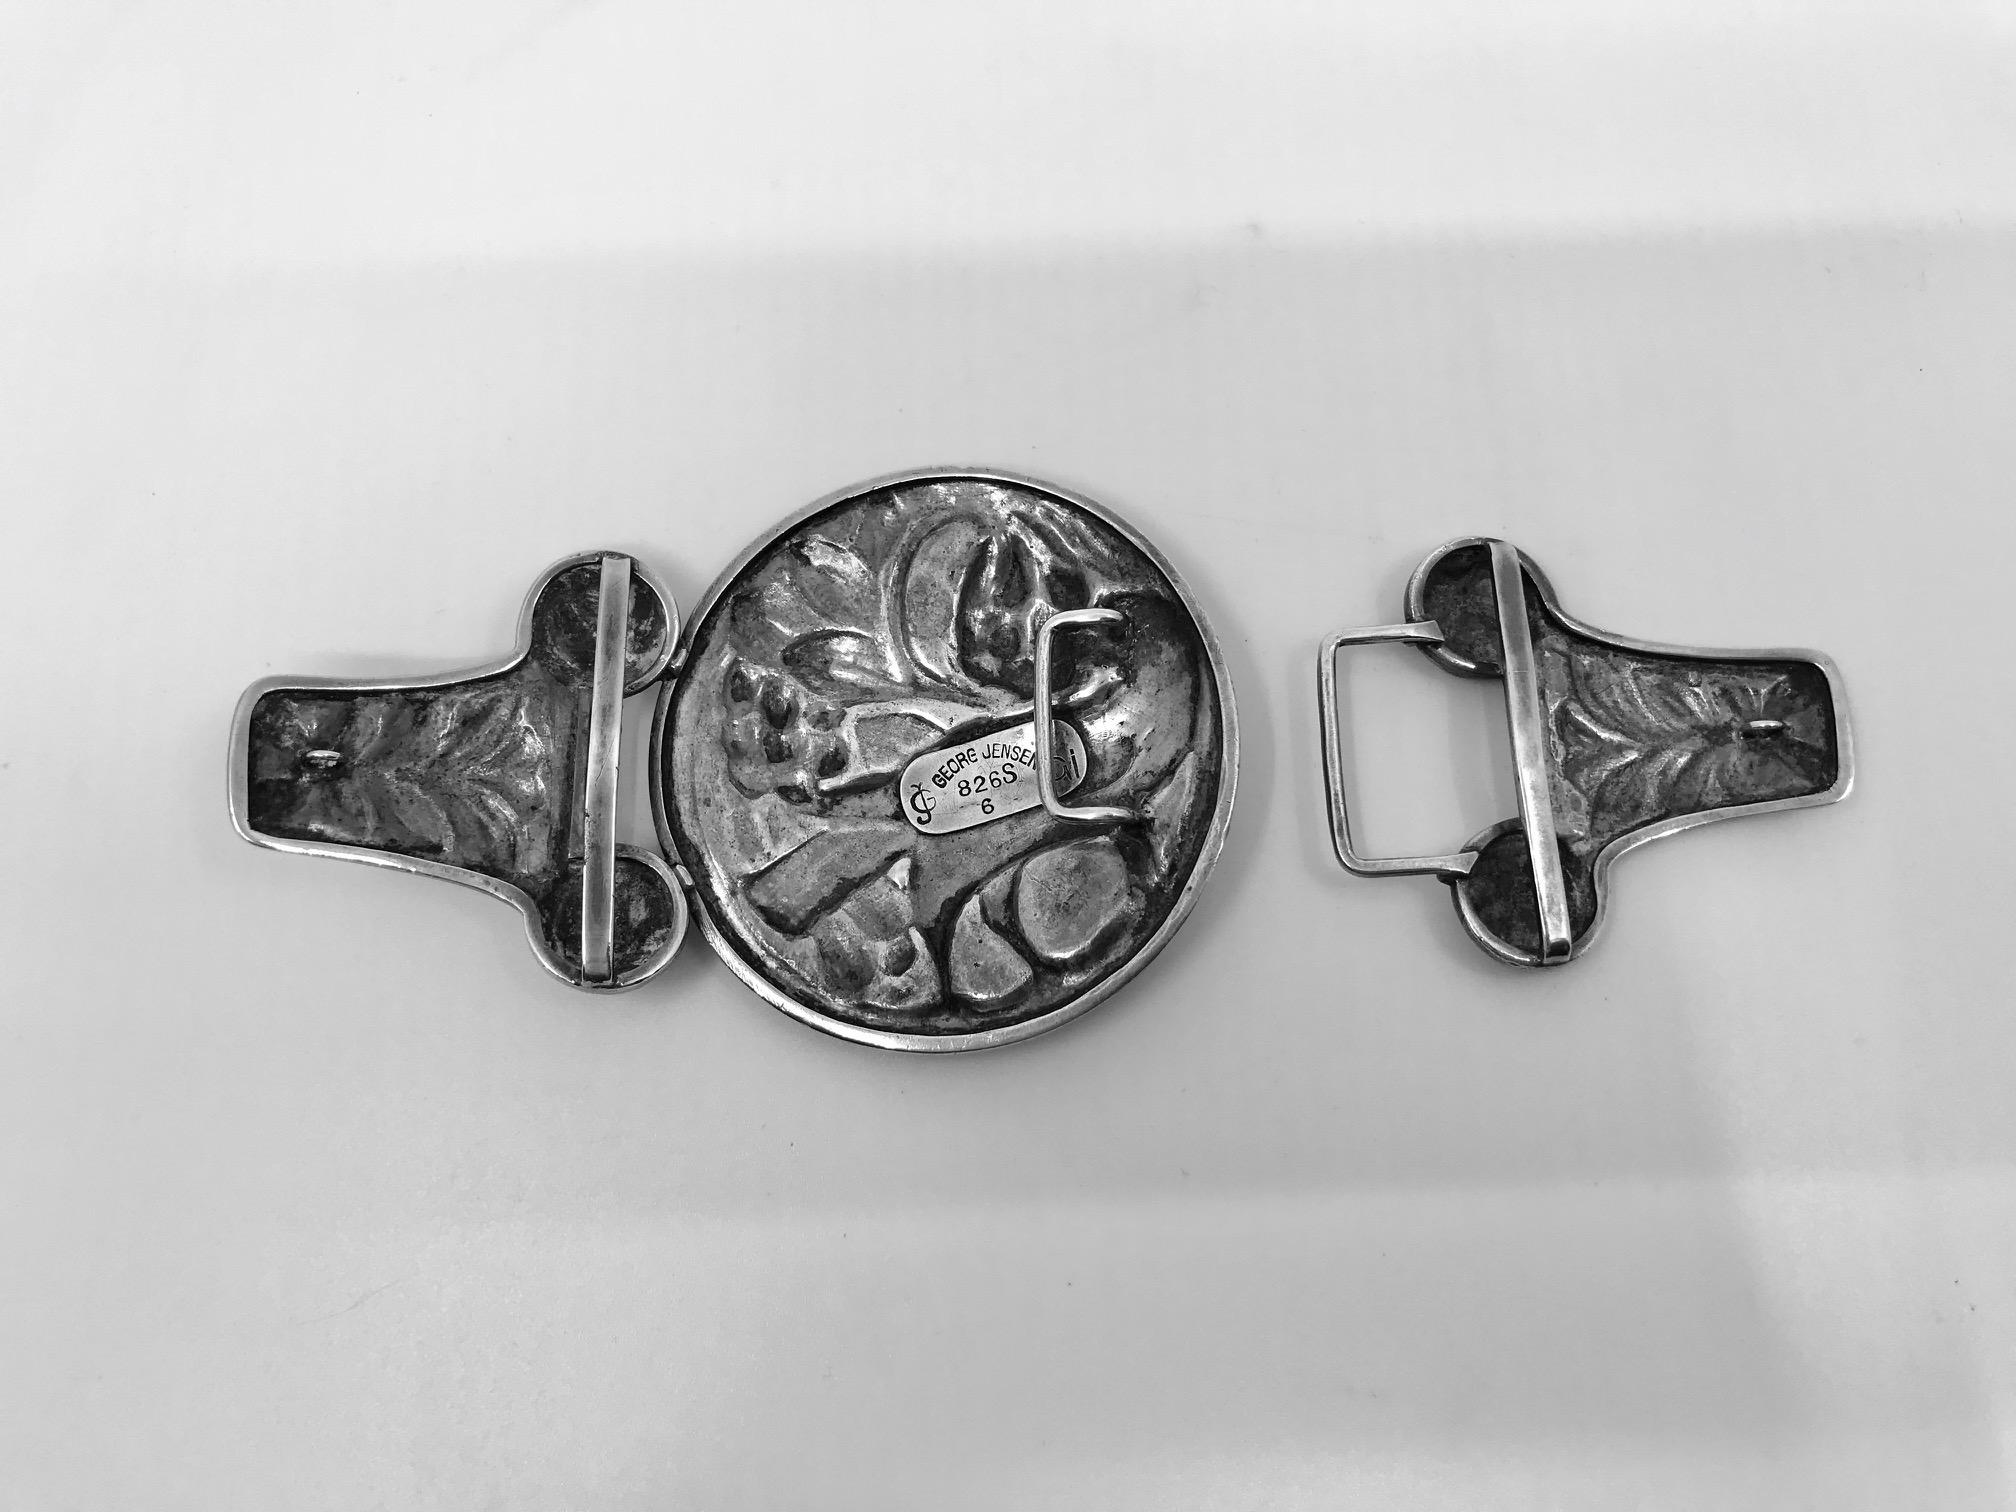 This is an extremely rare 826 silver Georg Jensen large belt buckle with bird and floral motif, design #6 by Georg Jensen himself.

Measures 5 5/8″ x 2 5/8″ (14.1cm x 6.7cm).

Antique Georg Jensen hallmarks from 1908-1914.